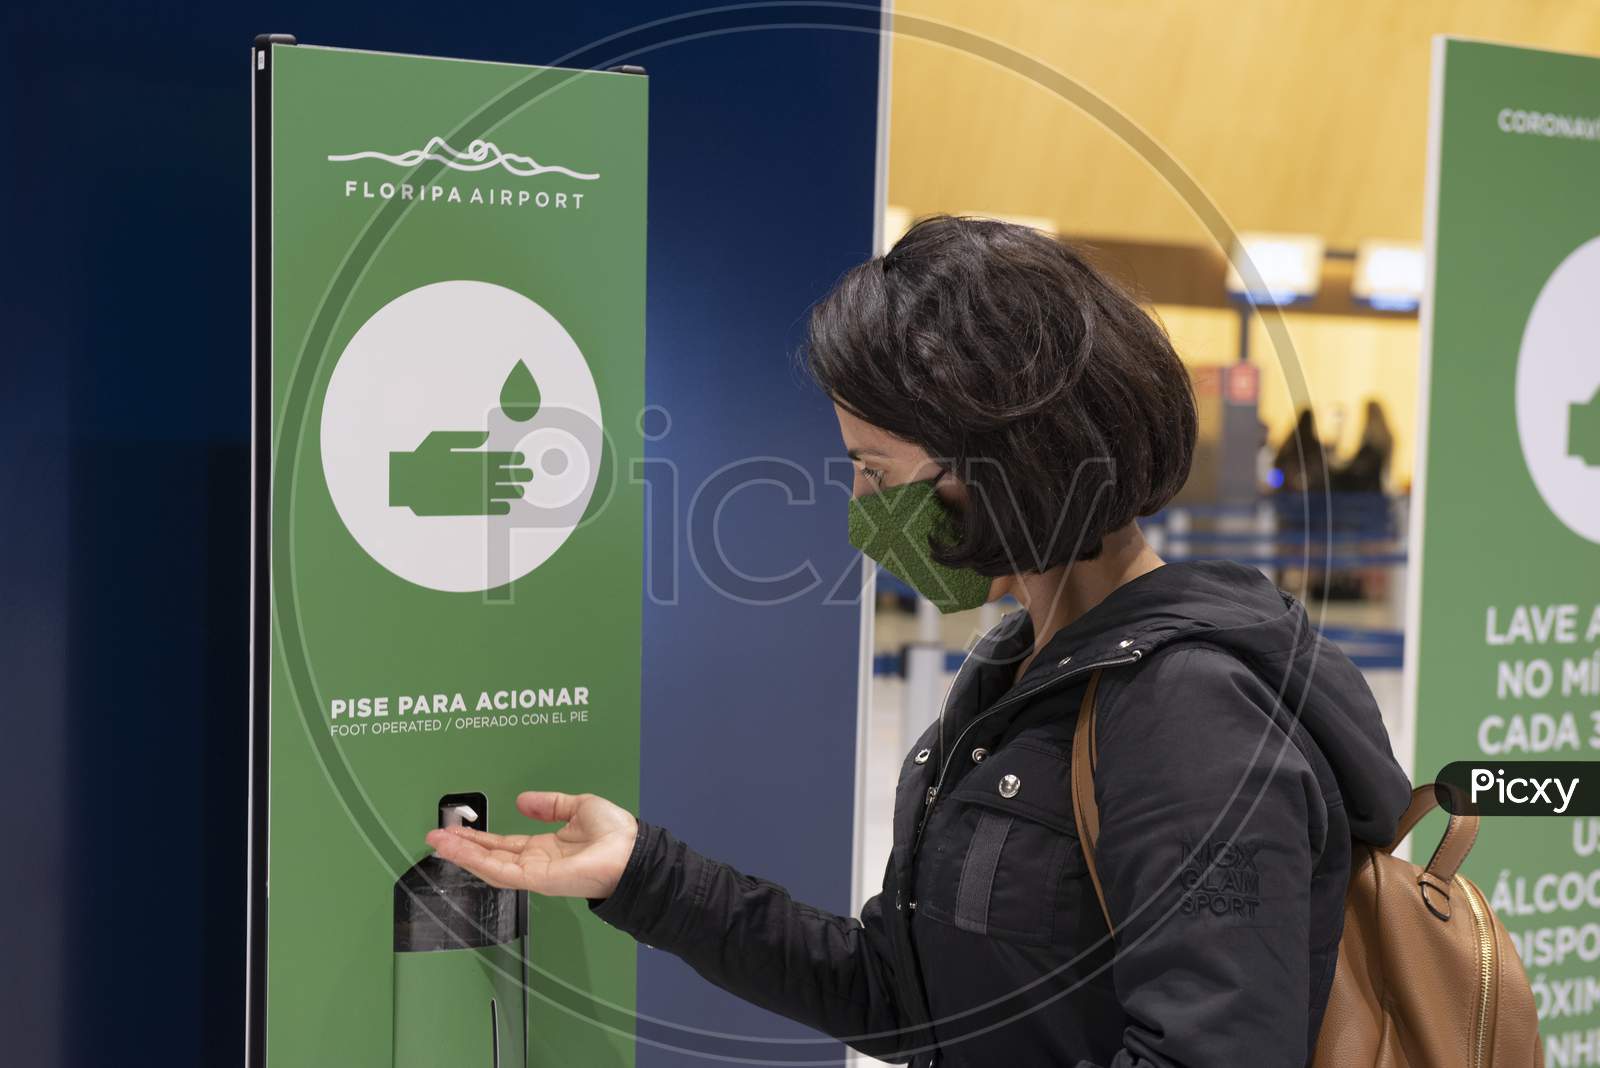 Florianopolis, Brazil. 15/09/2020: Young Woman Wearing Corona Contagion Mask Sterilizing Her Hands With Alcohol Gel In The Airport Lounge. Alcohol Gel Dispenser Distributed To Passengers.